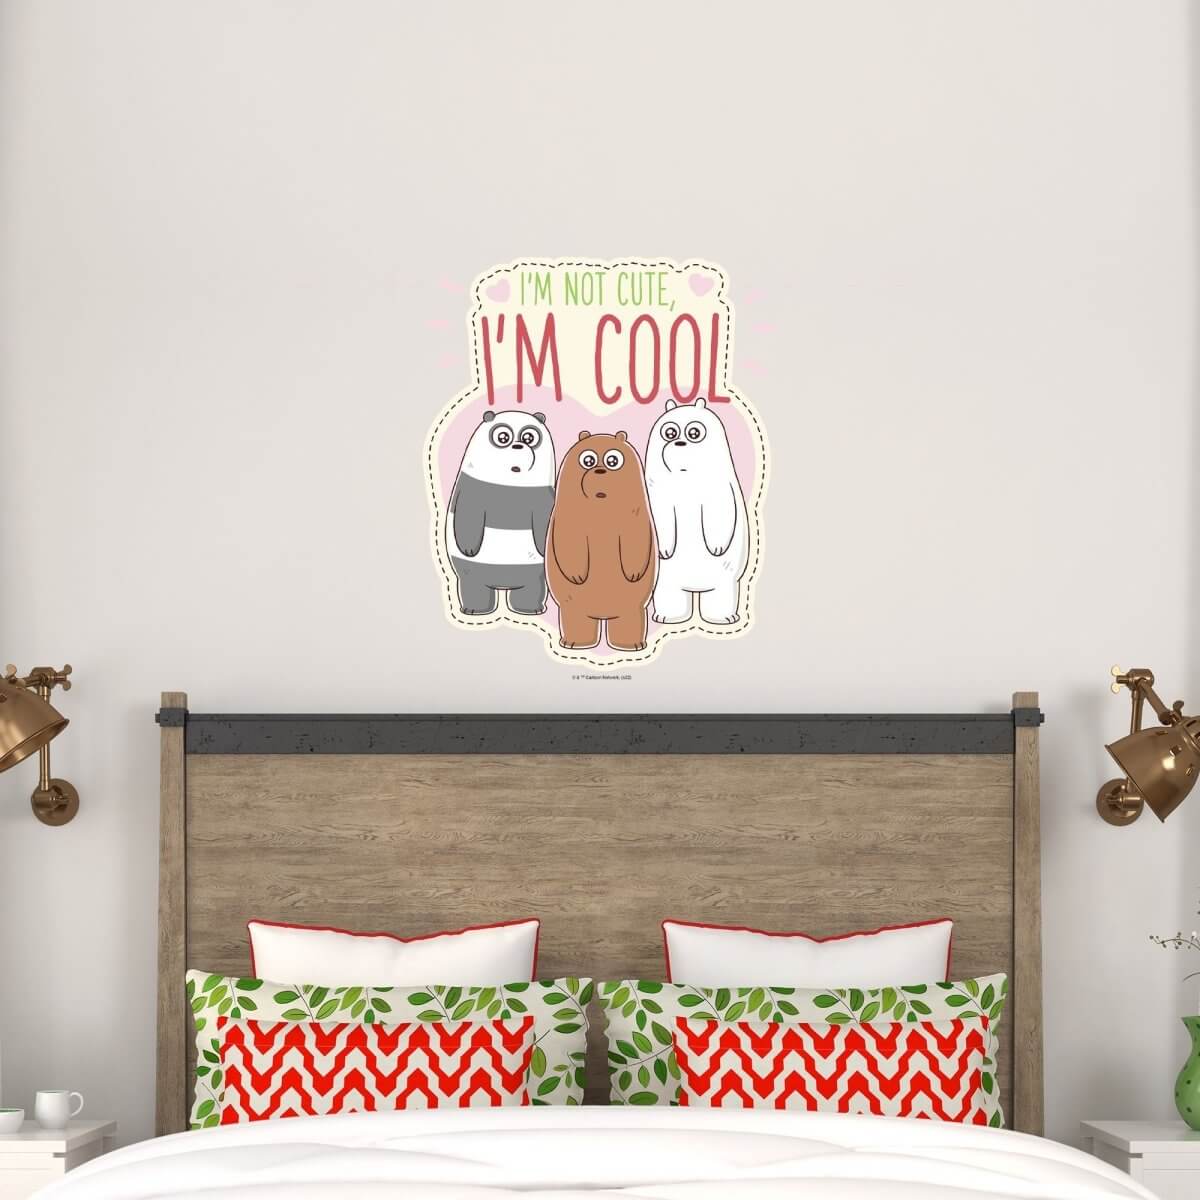 Kismet Decals Home & Room Decor We Bare Bears Cool Bears Wall decal sticker - officially licensed - latex printed with no solvent odor - Kismet Decals